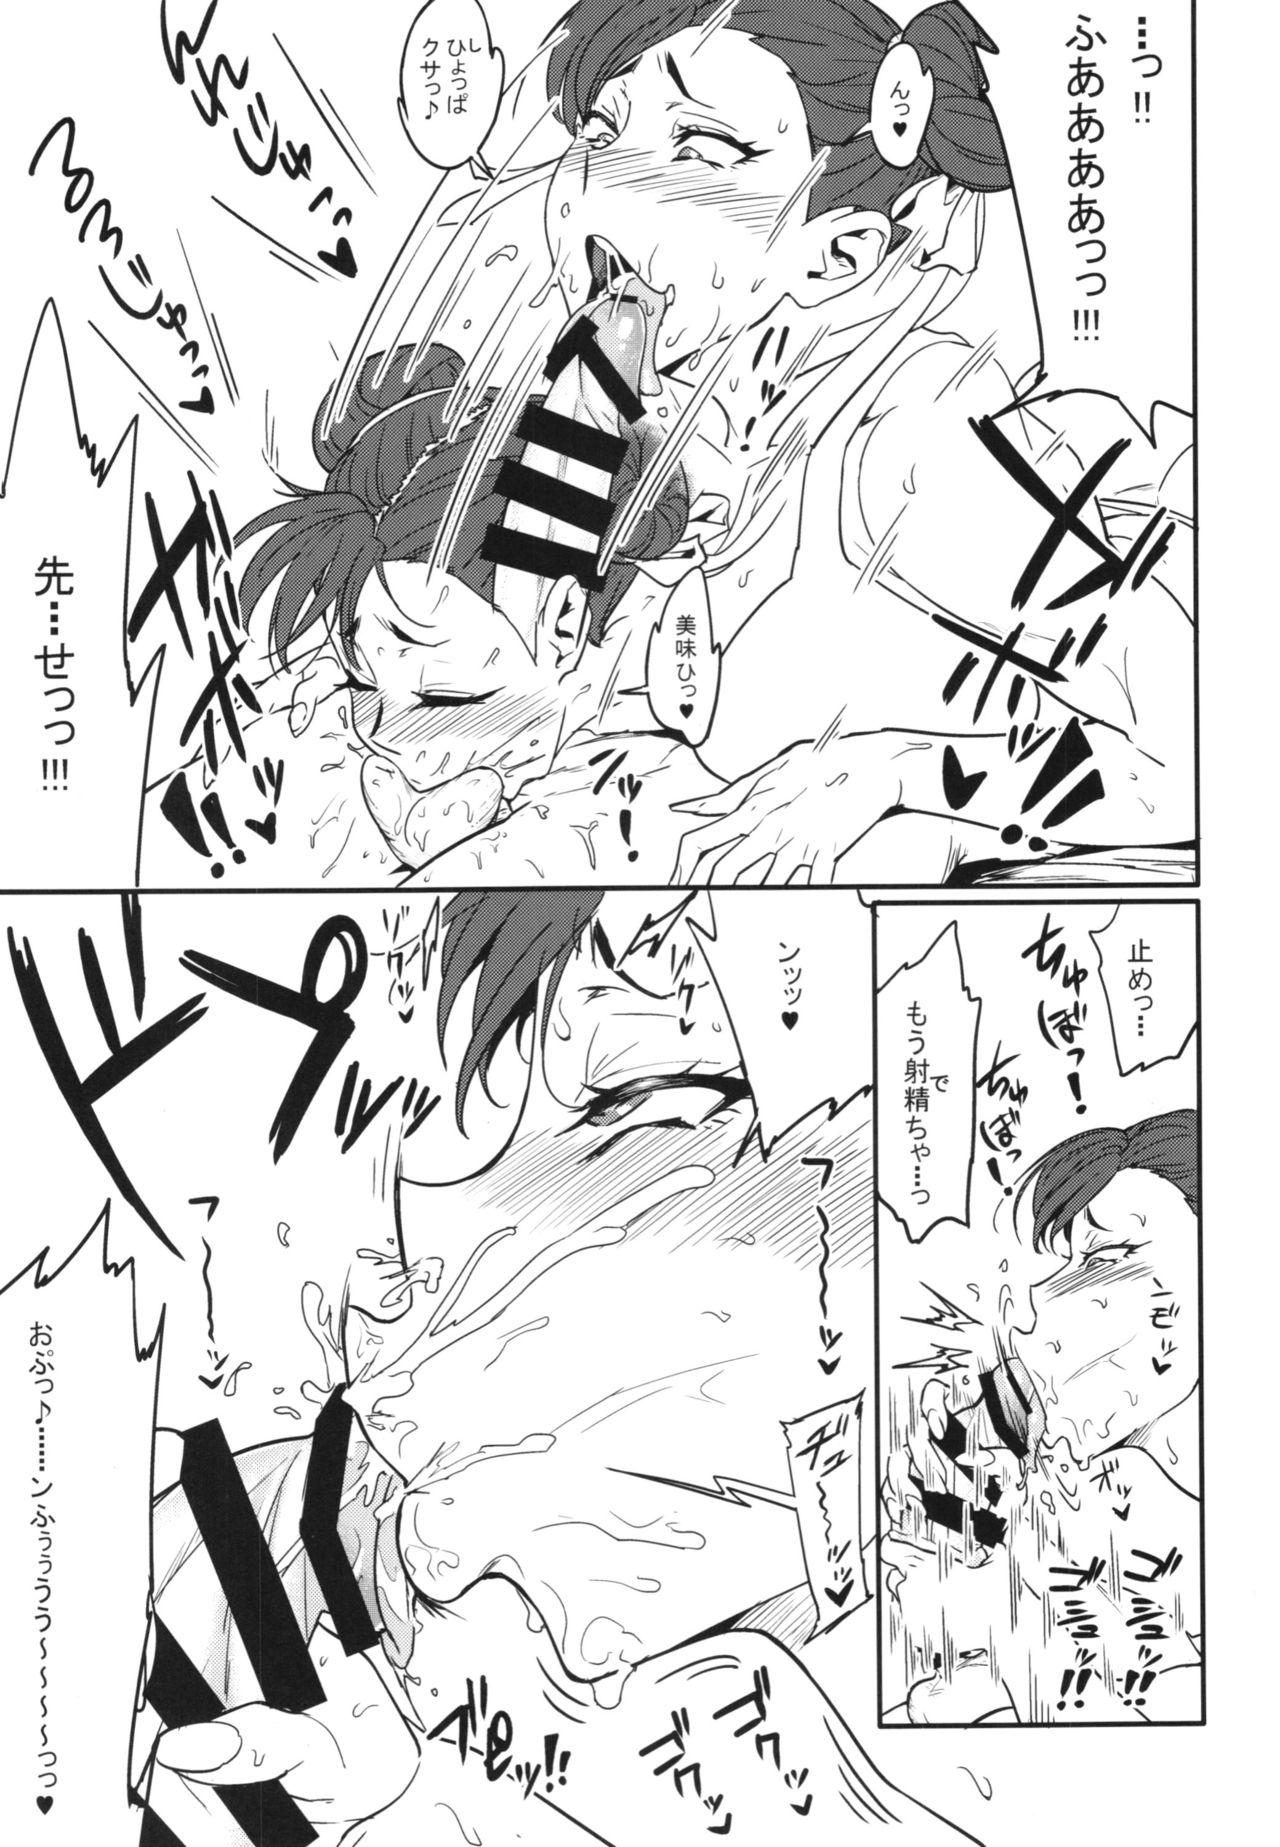 Sextape Houmitsusen!! + Paper - Street fighter Cosplay - Page 9